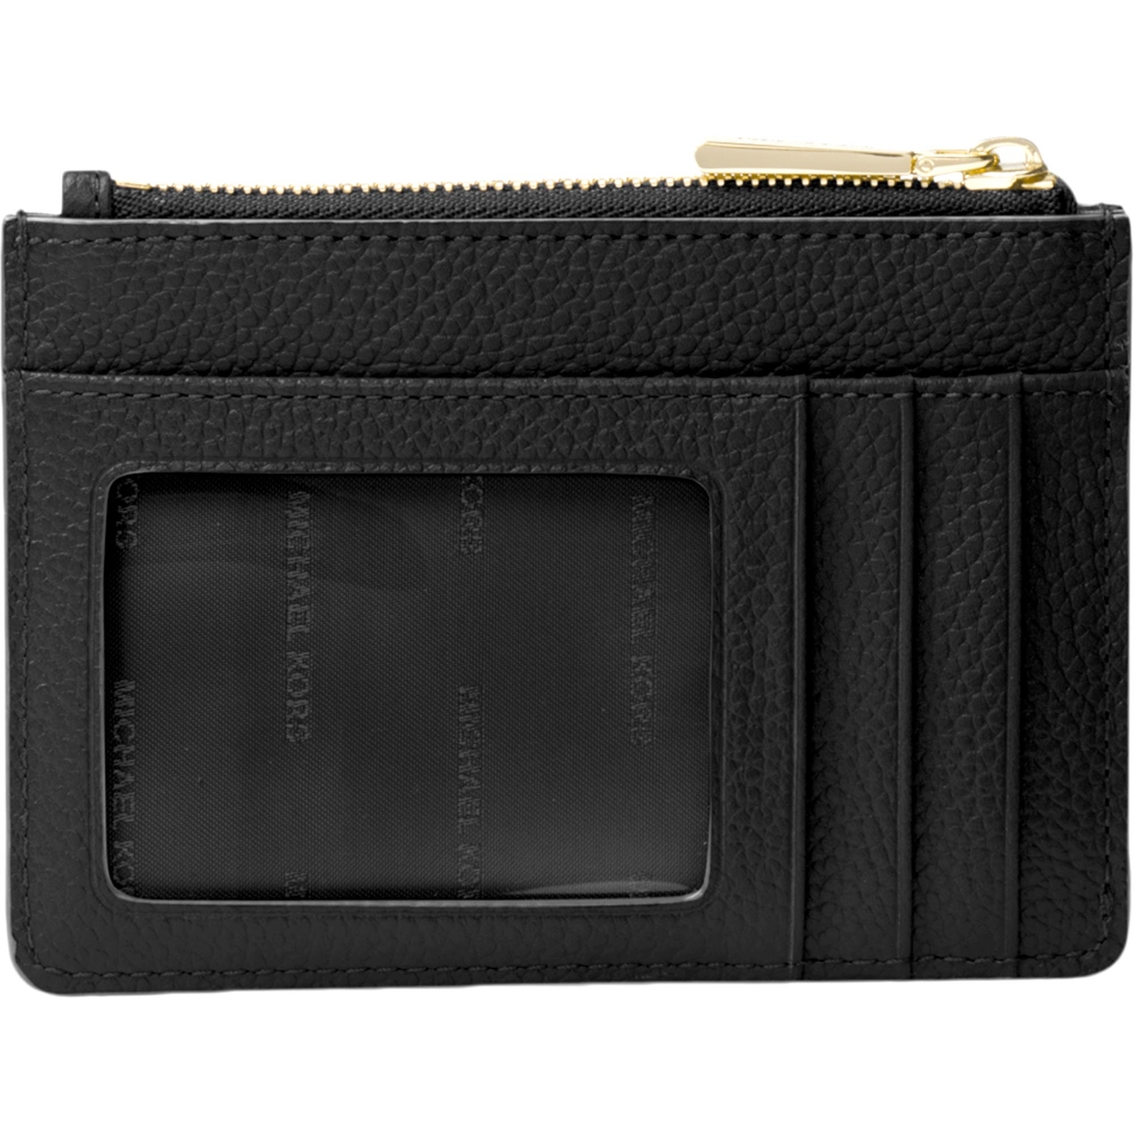 Michael Kors Mercer Small Coin Purse - Image 3 of 3